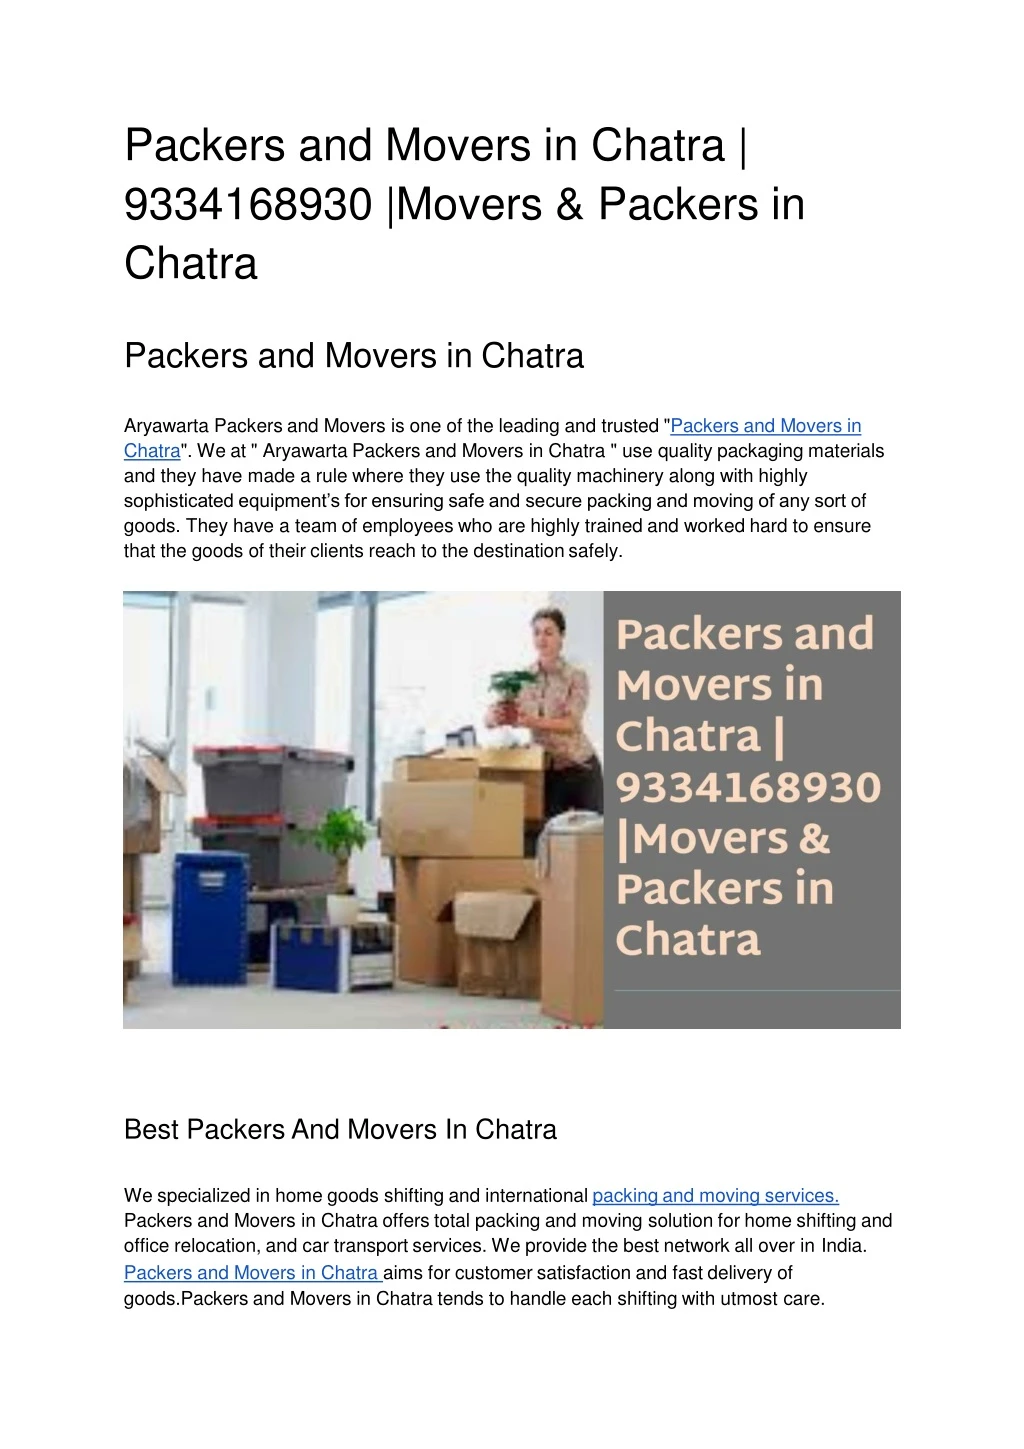 packers and movers in chatra 9334168930 movers packers in chatra